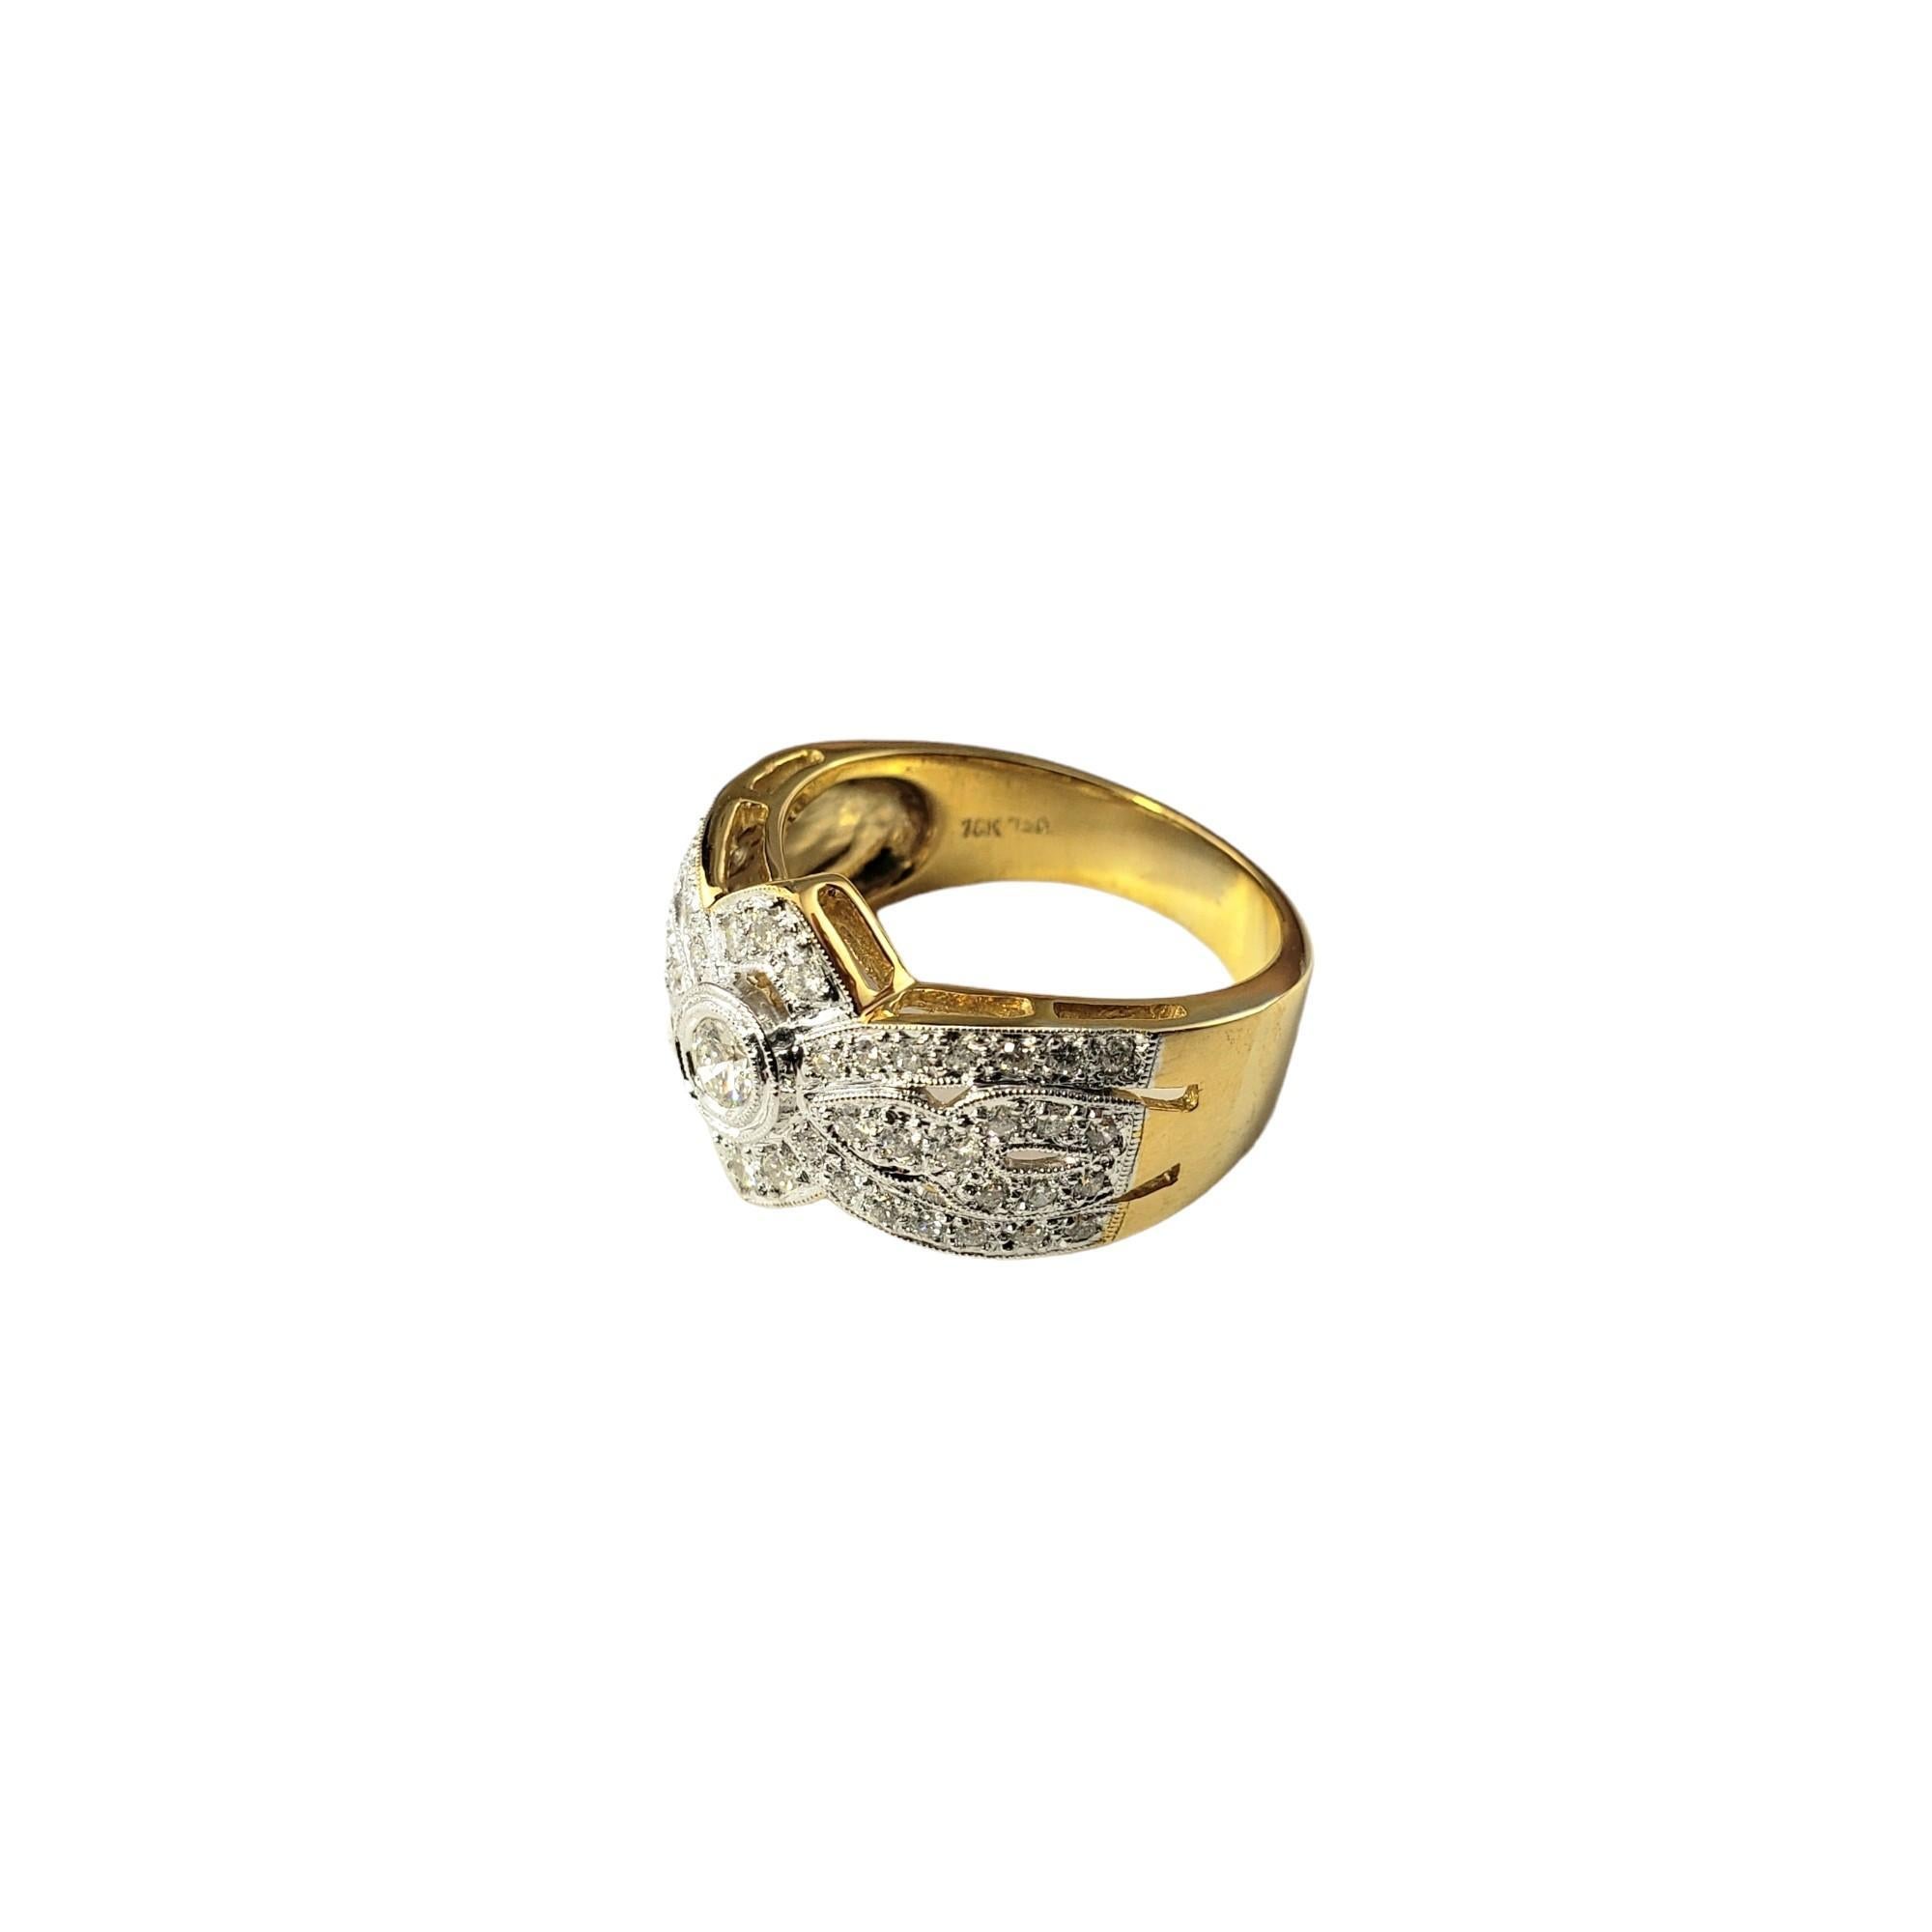 Women's  18K Yellow Gold and Diamond Ring Size 8 #15374 For Sale